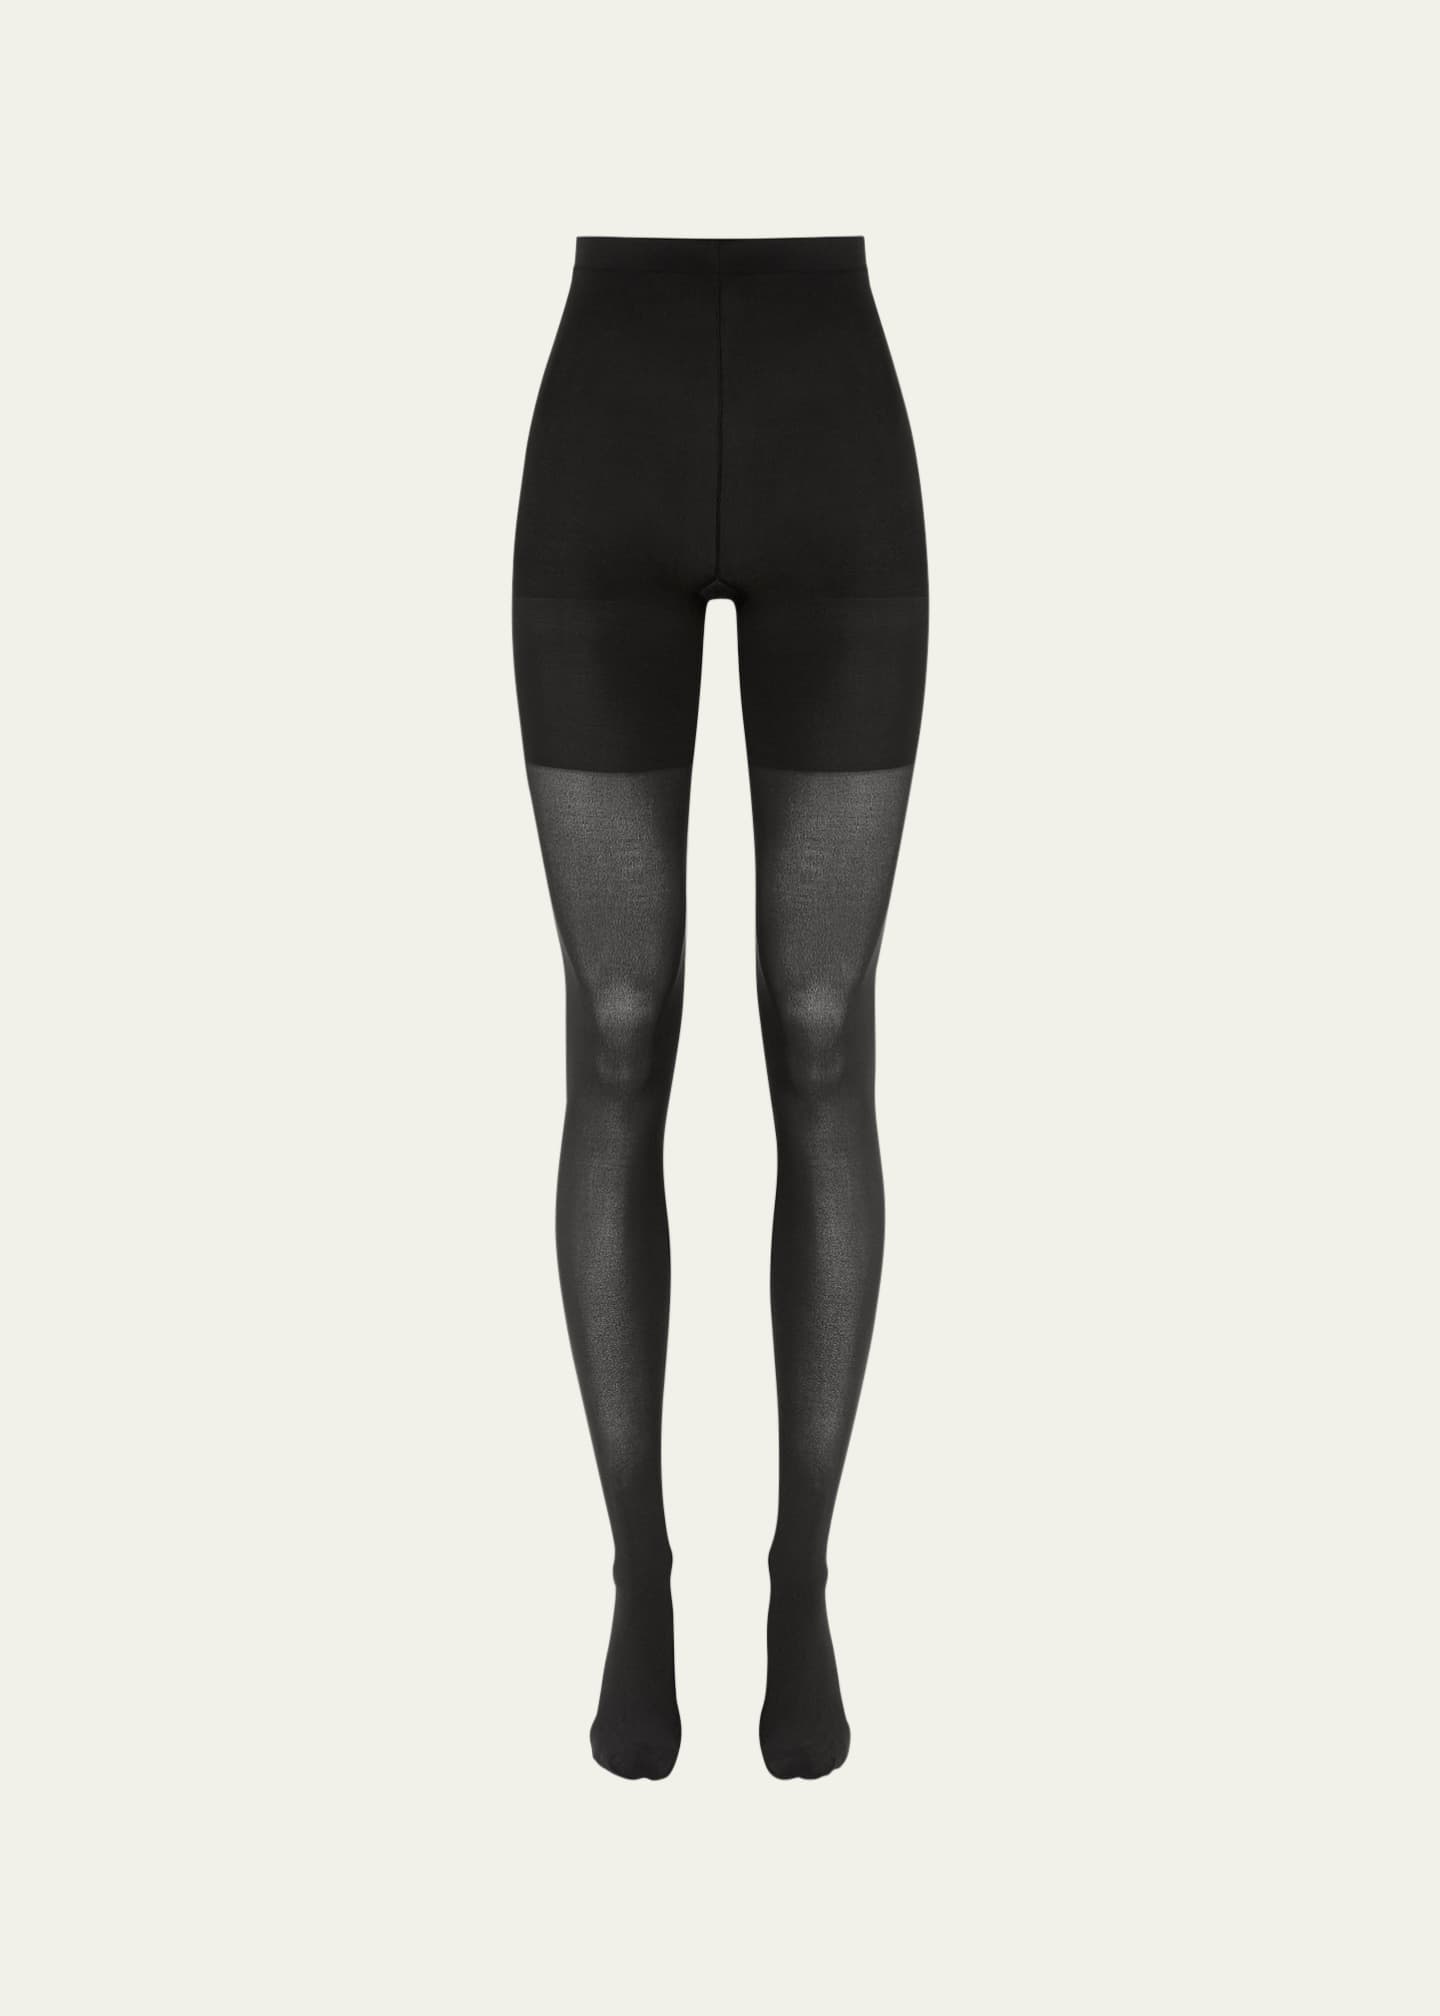 Spanx Luxe Sheer Tights Black